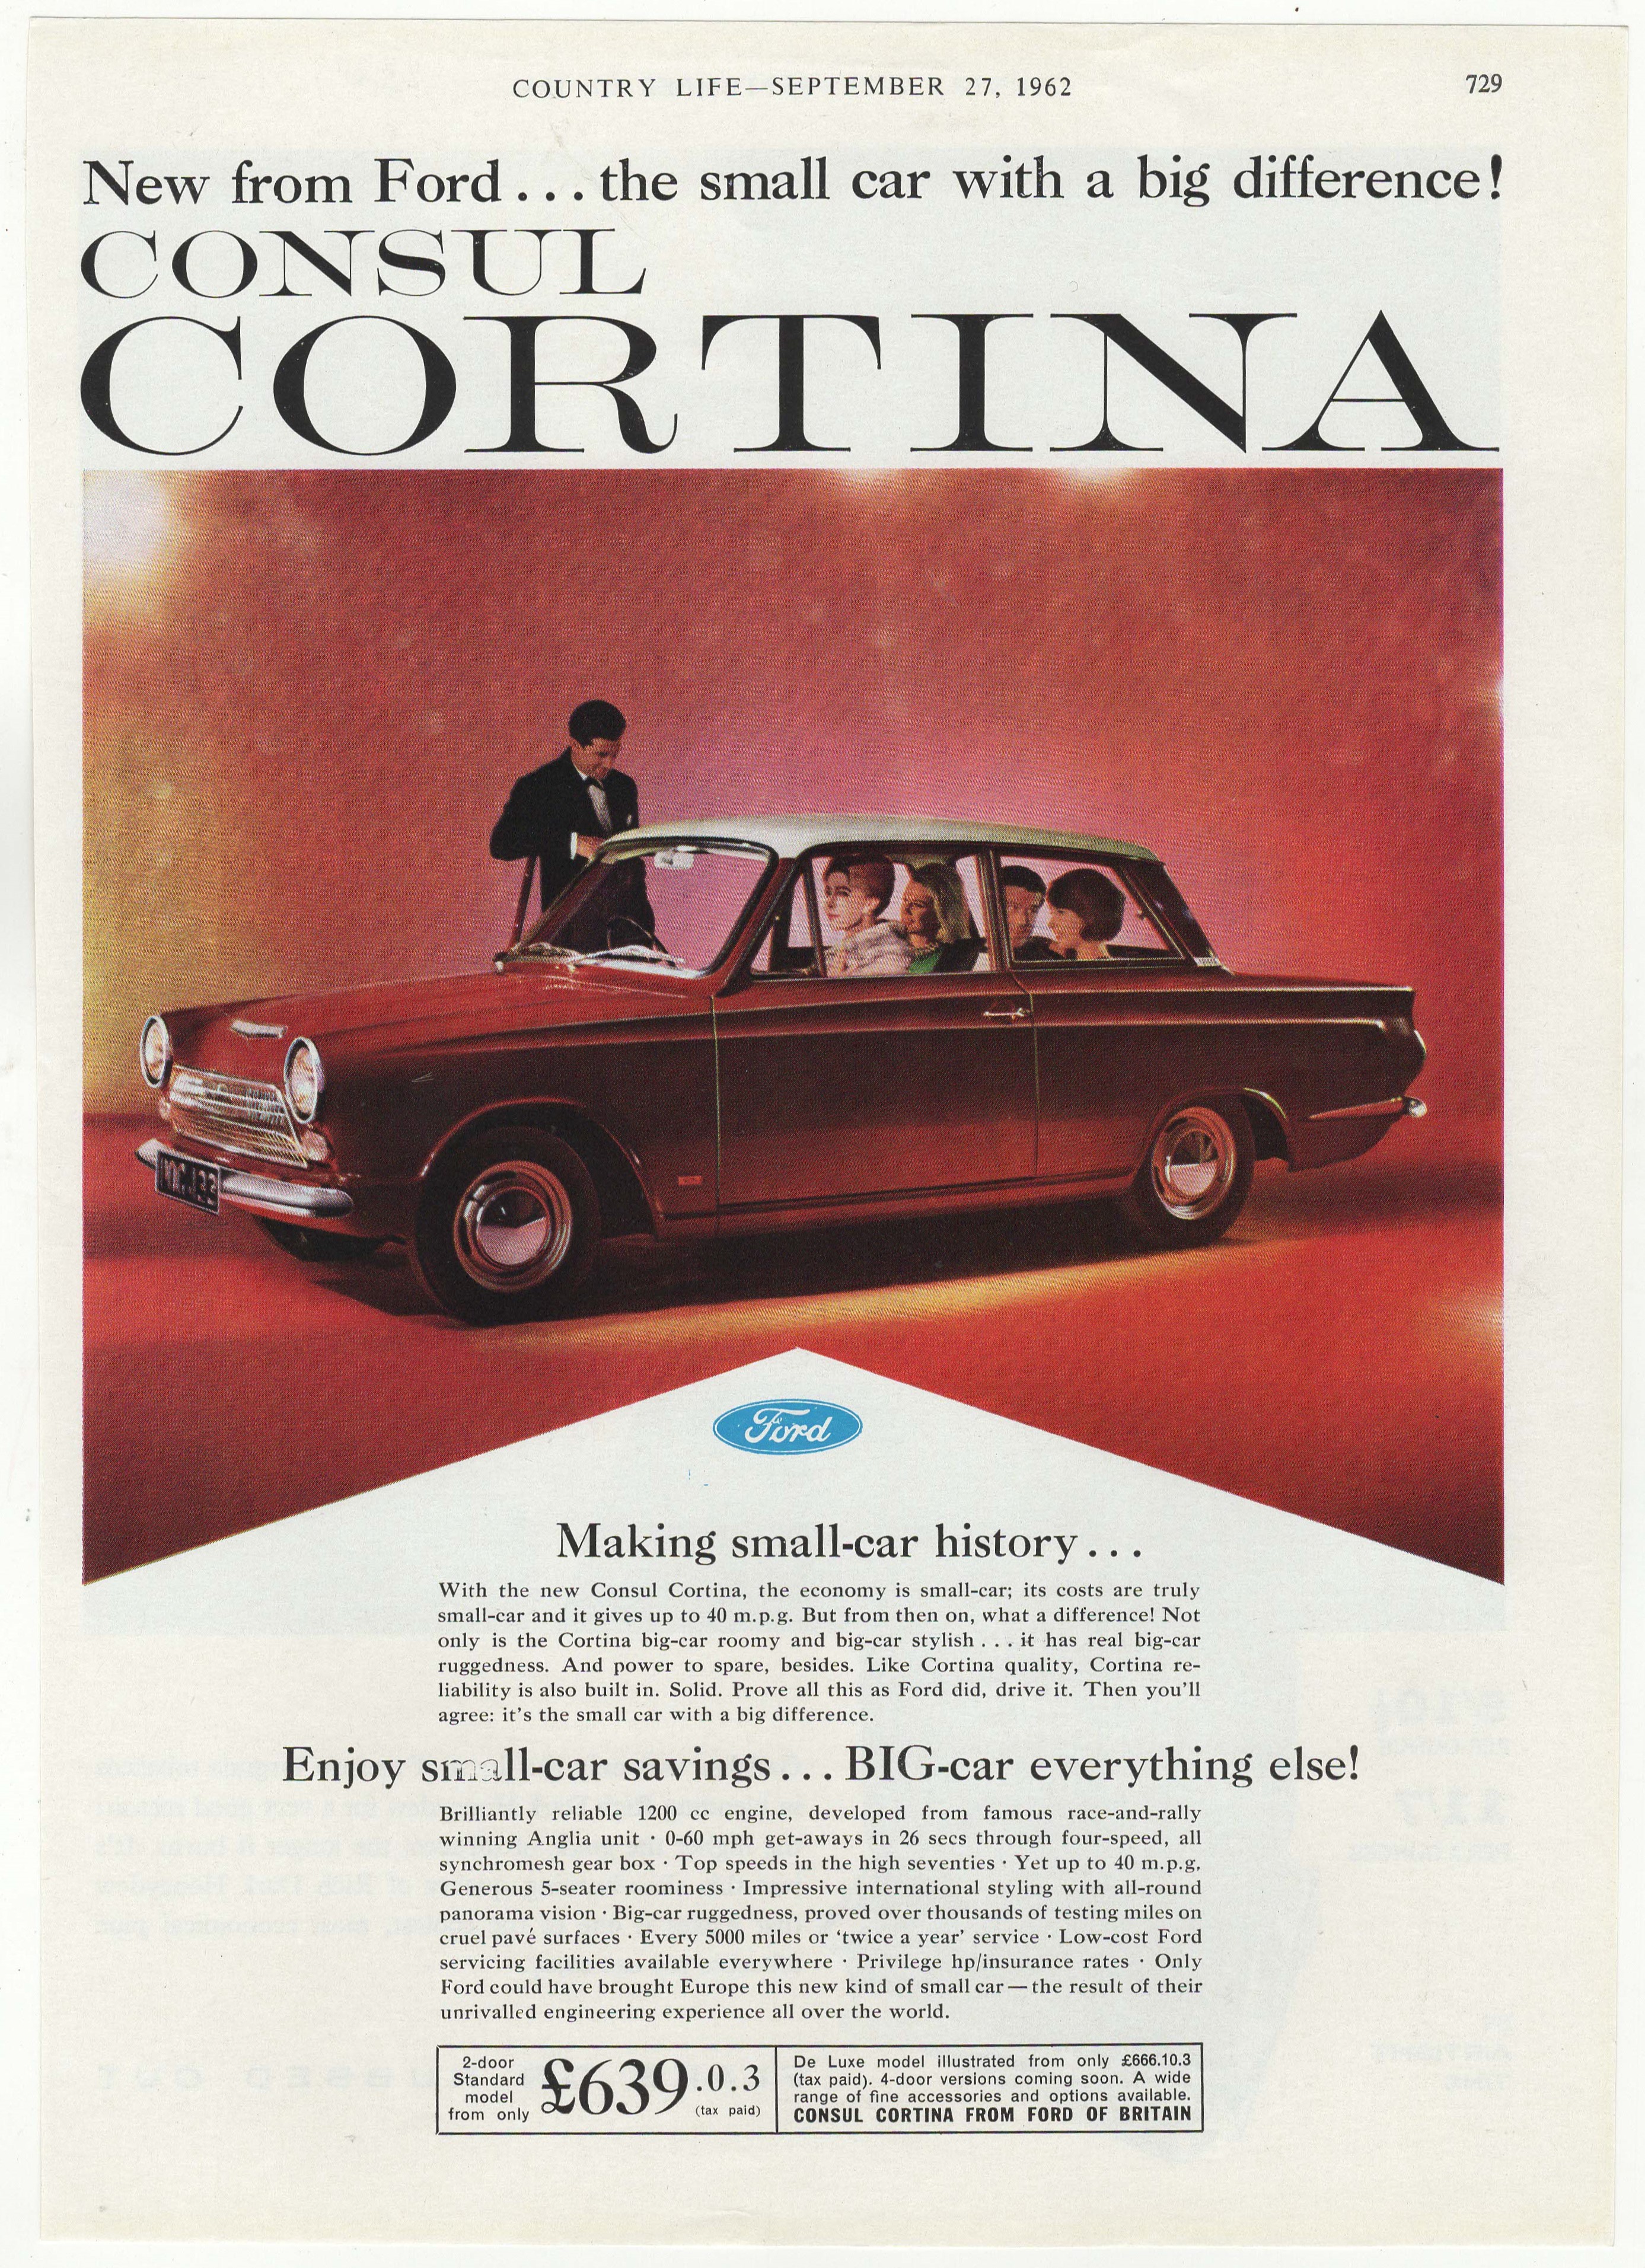 Consul Cortina 1962-full page colour advertisement-'Ford of Britain-Priced £639'-9" x 12" approx.